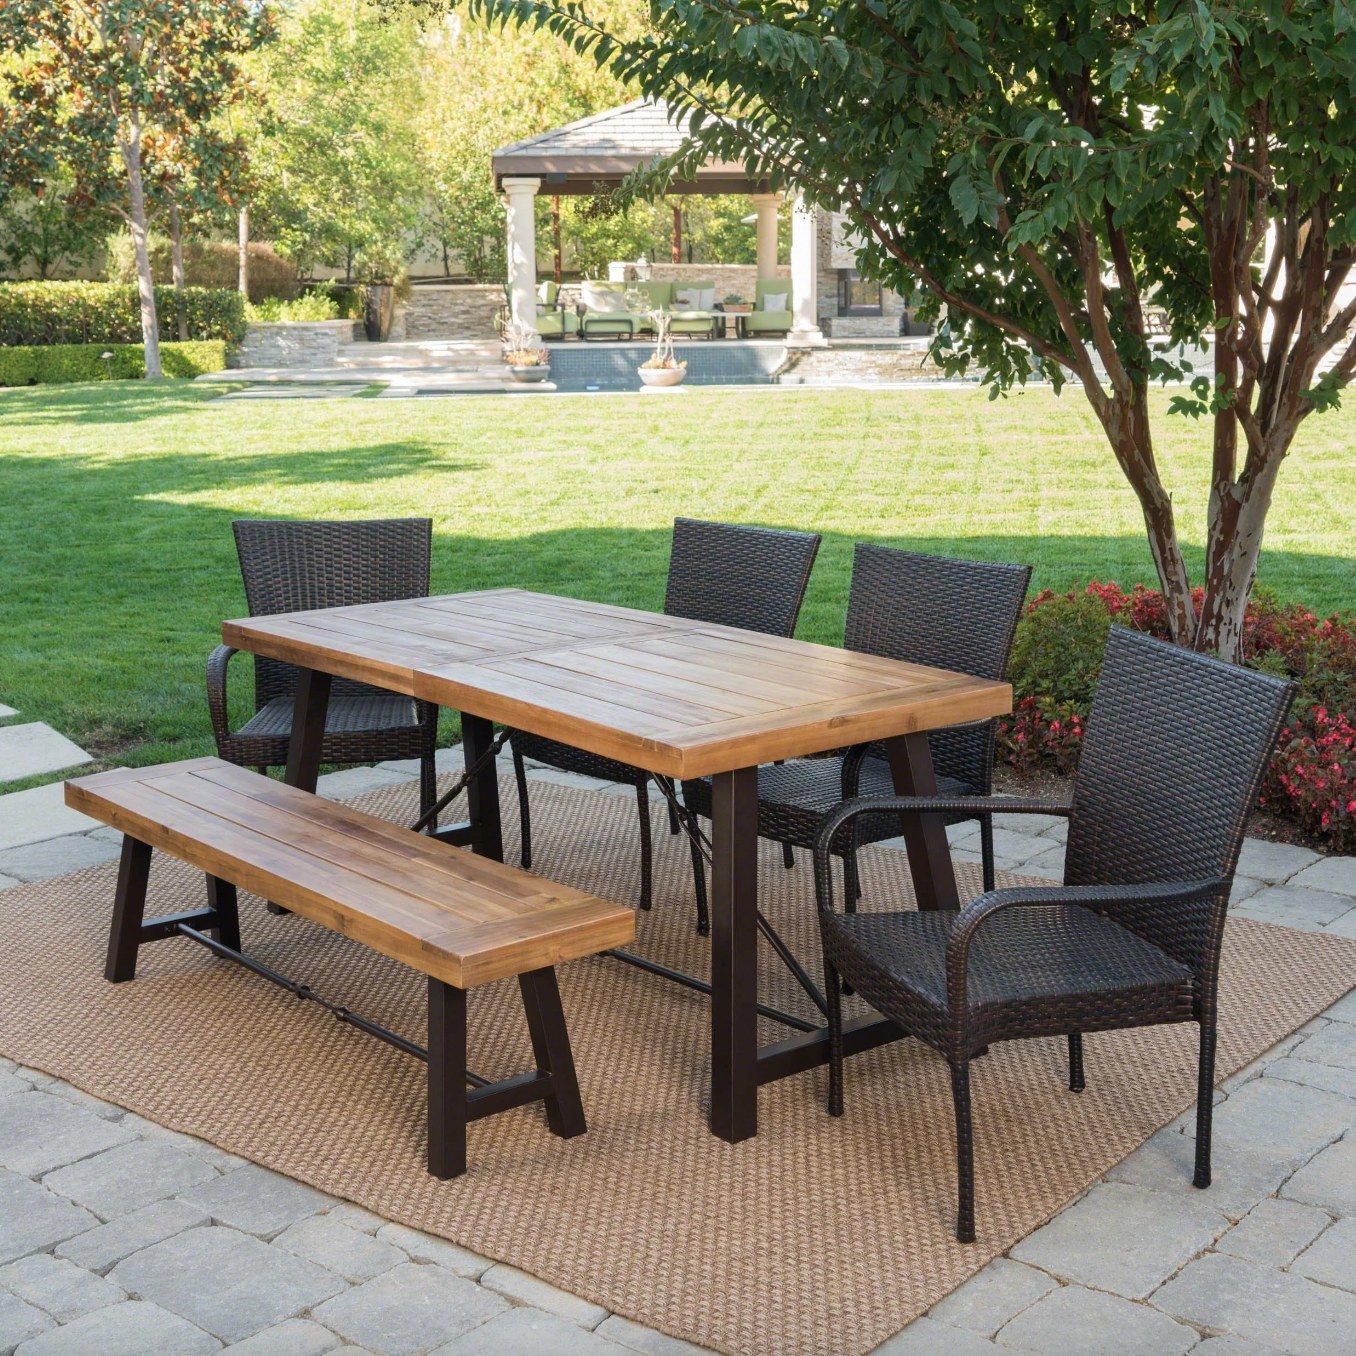 the light wood table and bench with dark wicker chairs in a decorated patio space